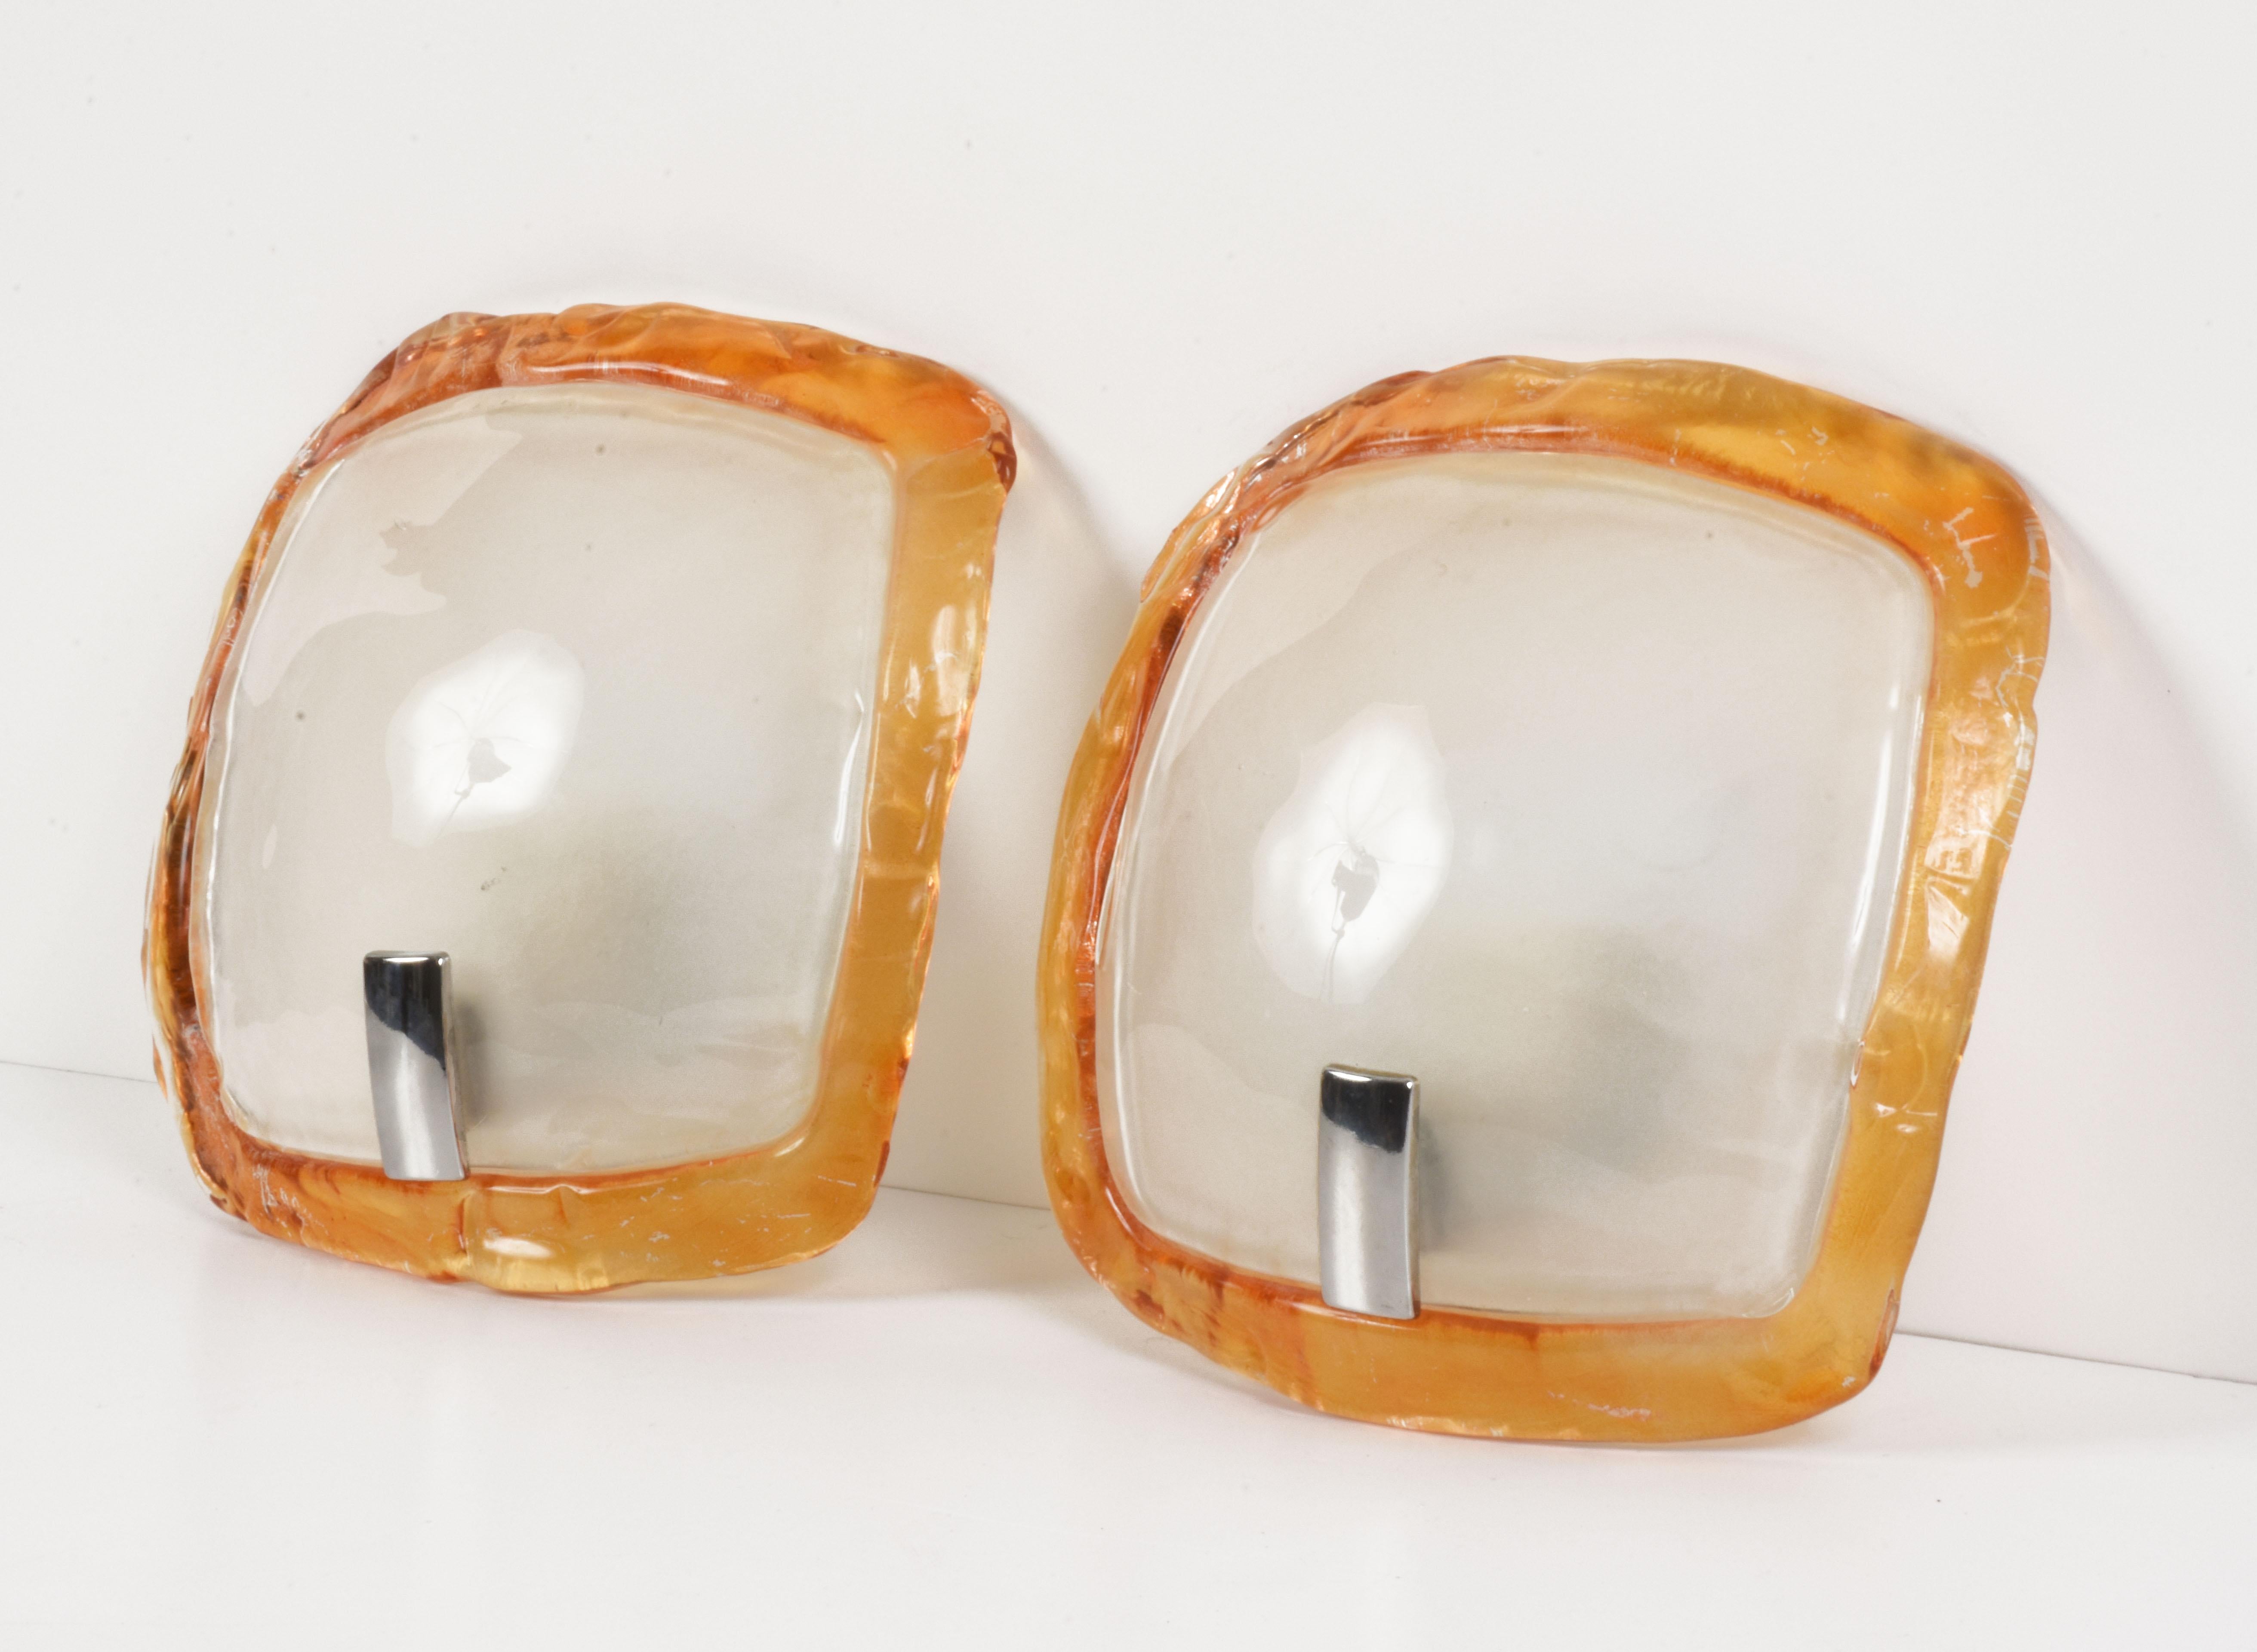 Pair of orange and crystal Murano glass sconces with iron finishes. Produced in Italy during 1980s.

They consist of two parts, an orange and crystal Murano glass element resting on a metal base. Both elements influence the refraction of light,